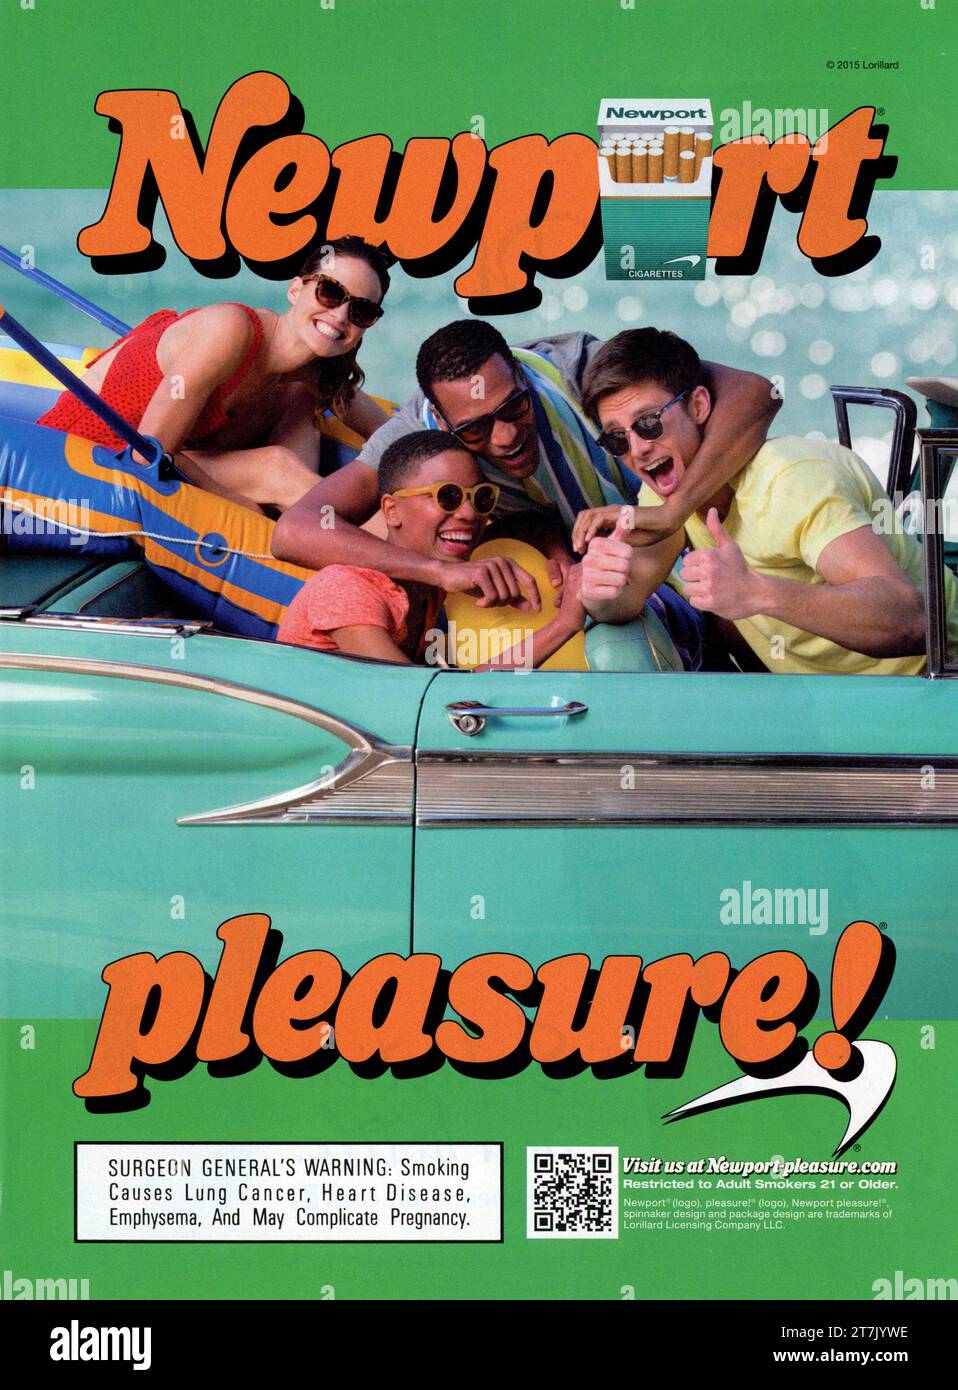 Vintage Playboy July/August 2015 Issue Advert, USA Stock Photo